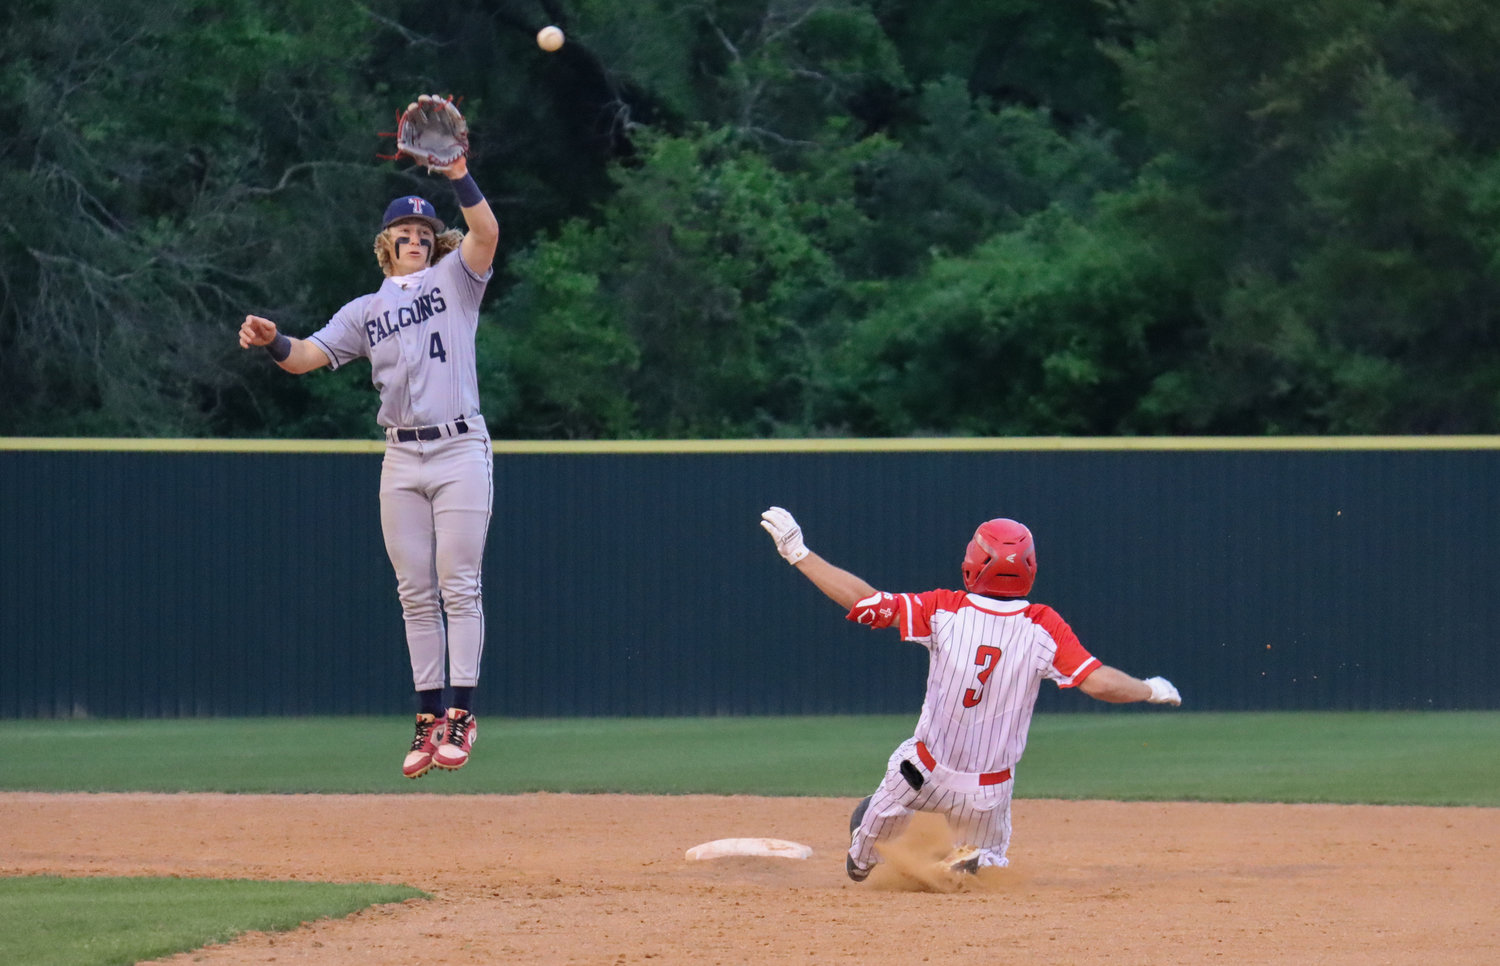 Tompkins senior first baseman Will Stark (4) leaps in an attempt to catch a wayward throw as Katy senior Caleb Matthews (3) slides safely to second base during their game Tuesday, March 30, at Katy High.